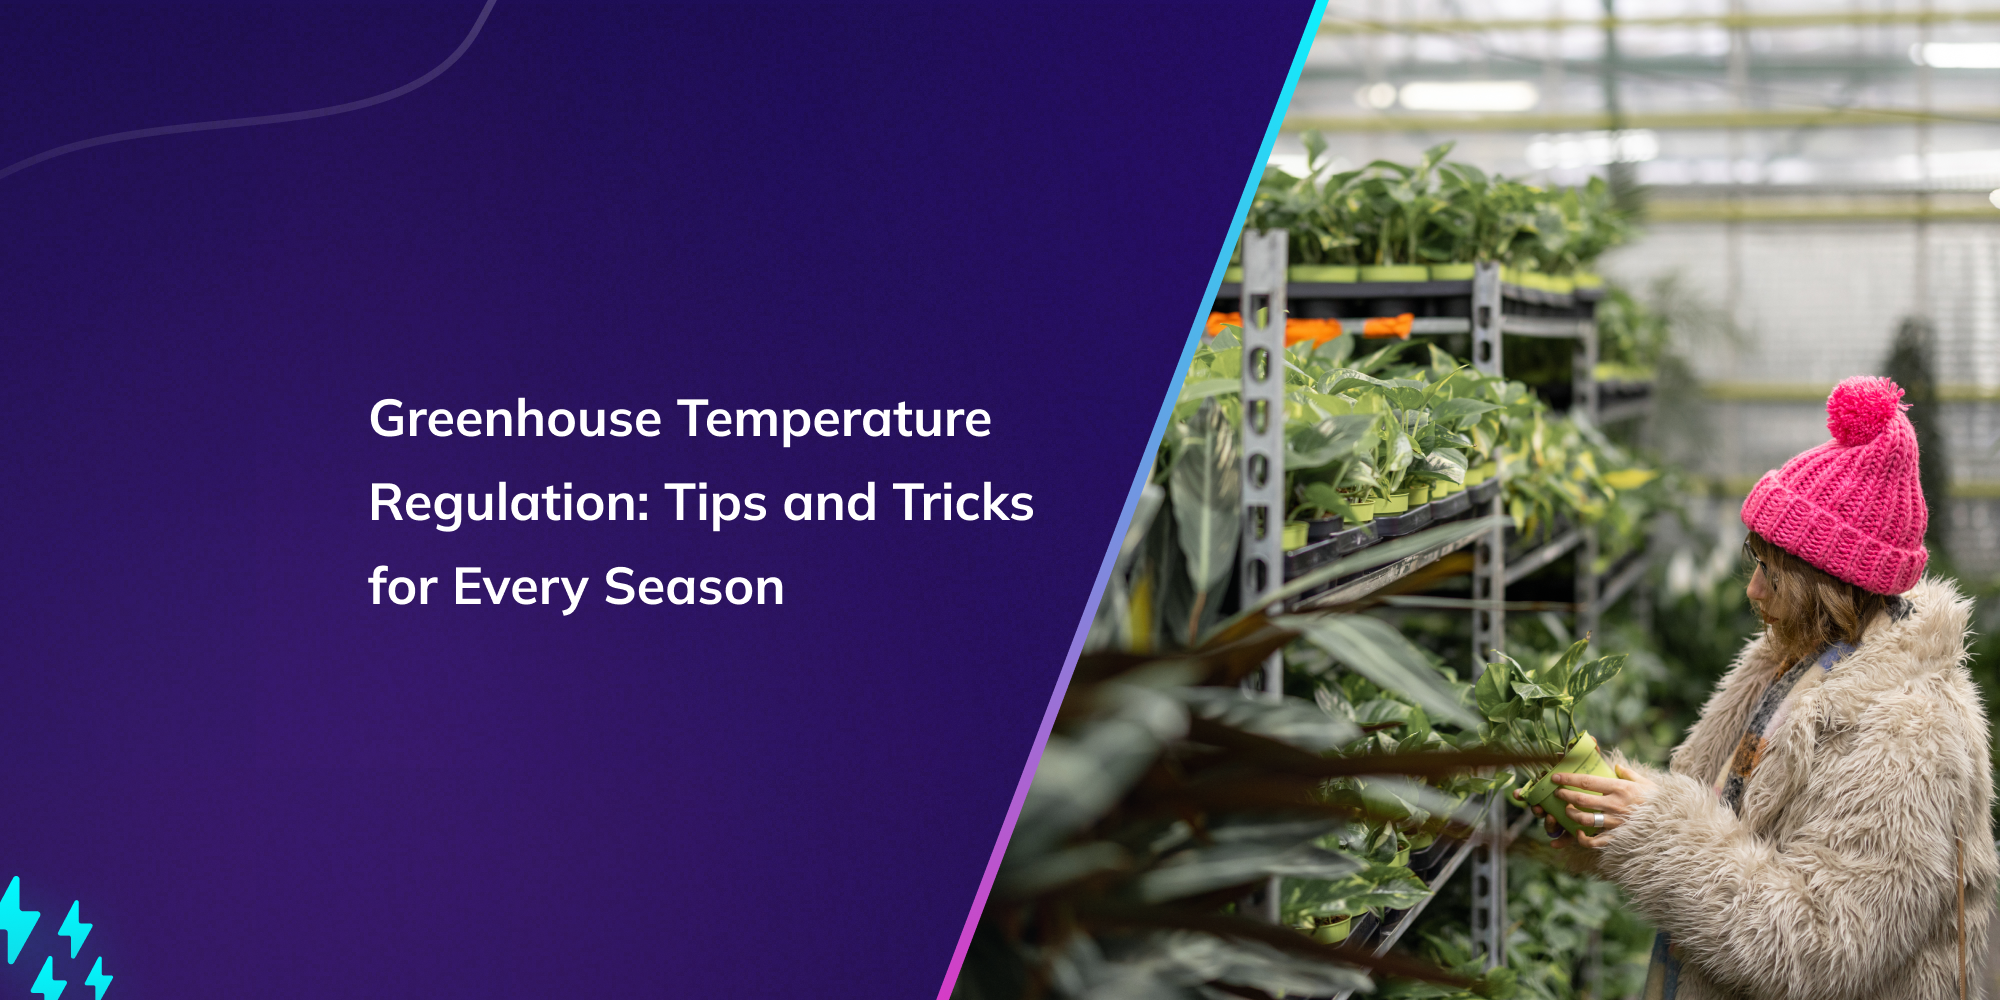 Greenhouse Temperature Regulation: Tips and Tricks for Every Season